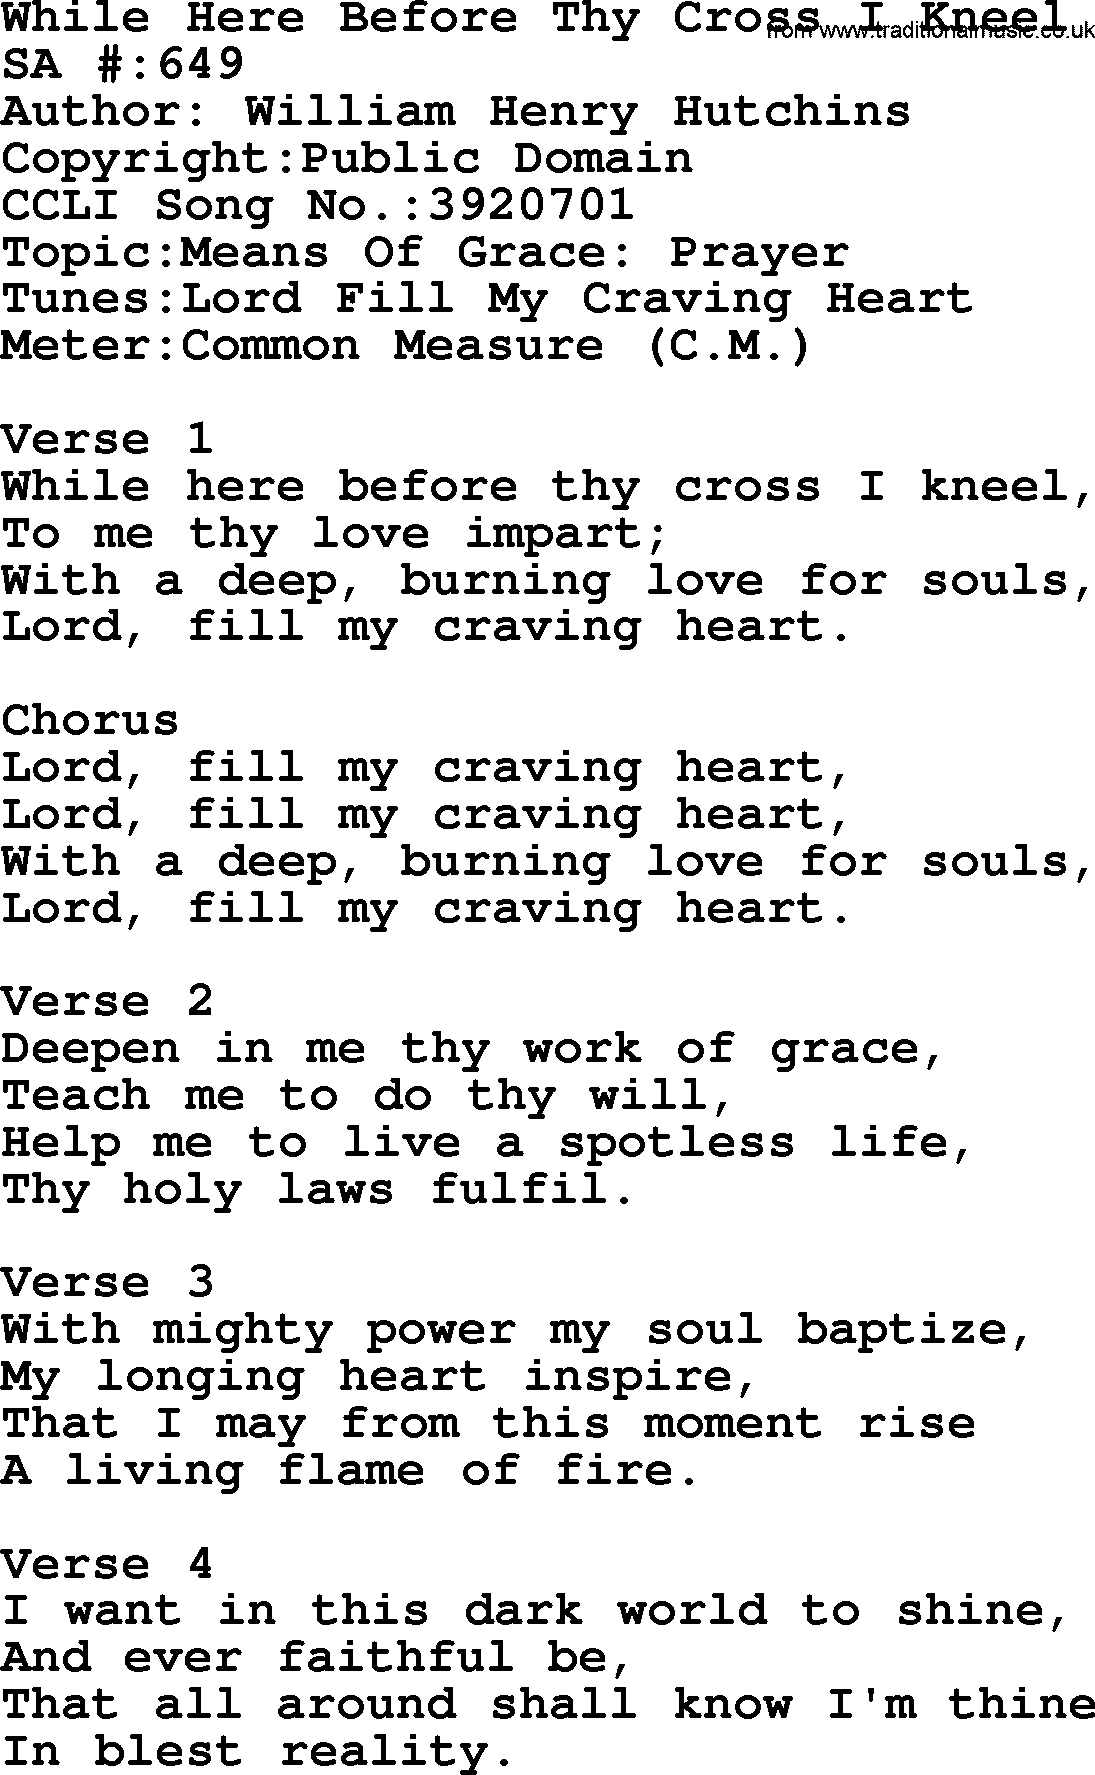 Salvation Army Hymnal, title: While Here Before Thy Cross I Kneel, with lyrics and PDF,